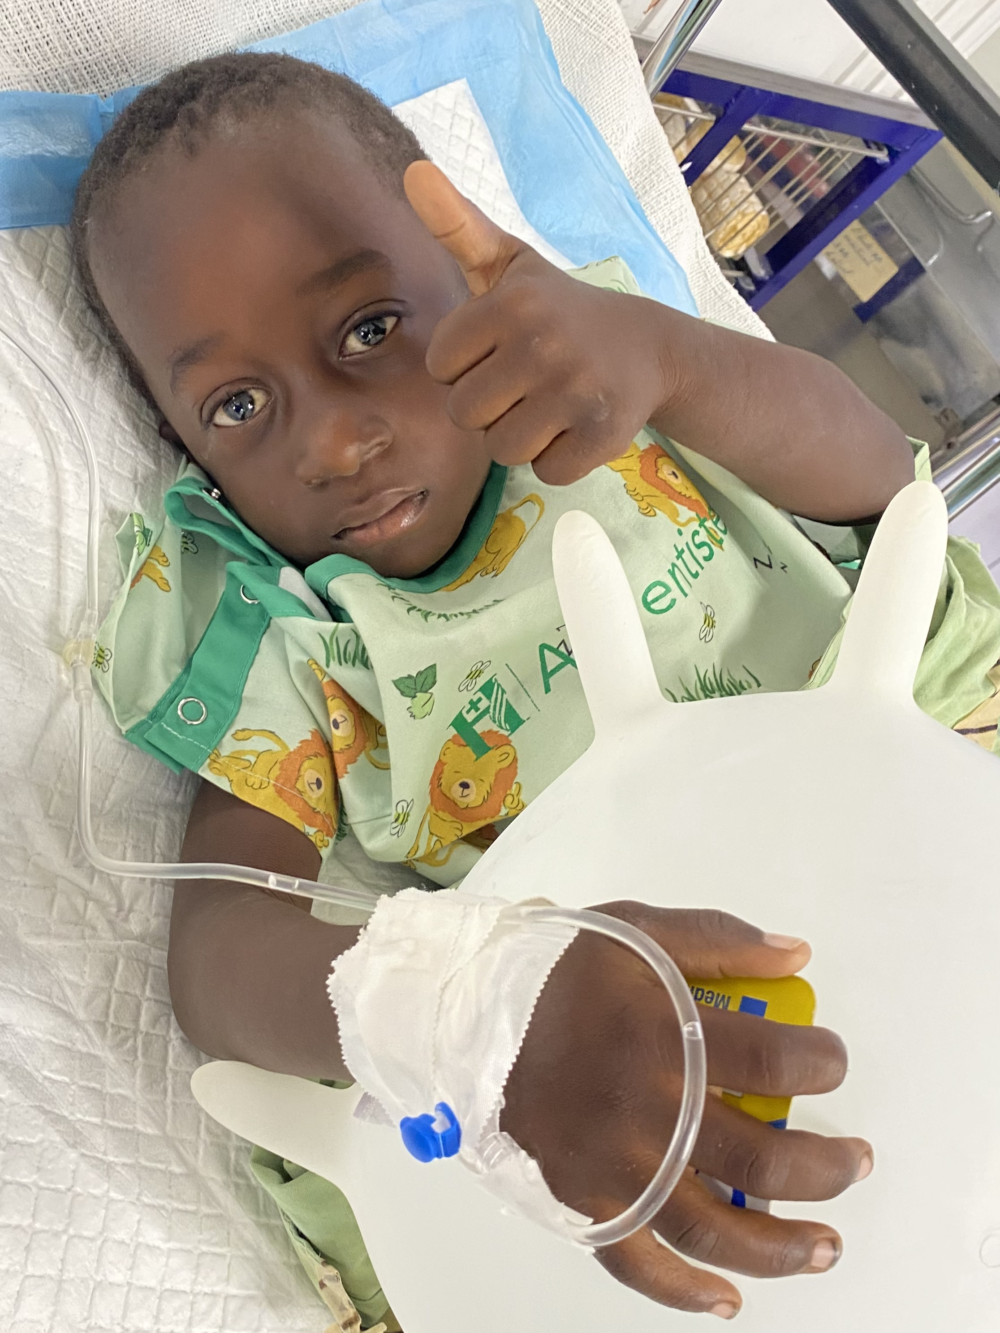 child in a hospital bed gives a thumbs up